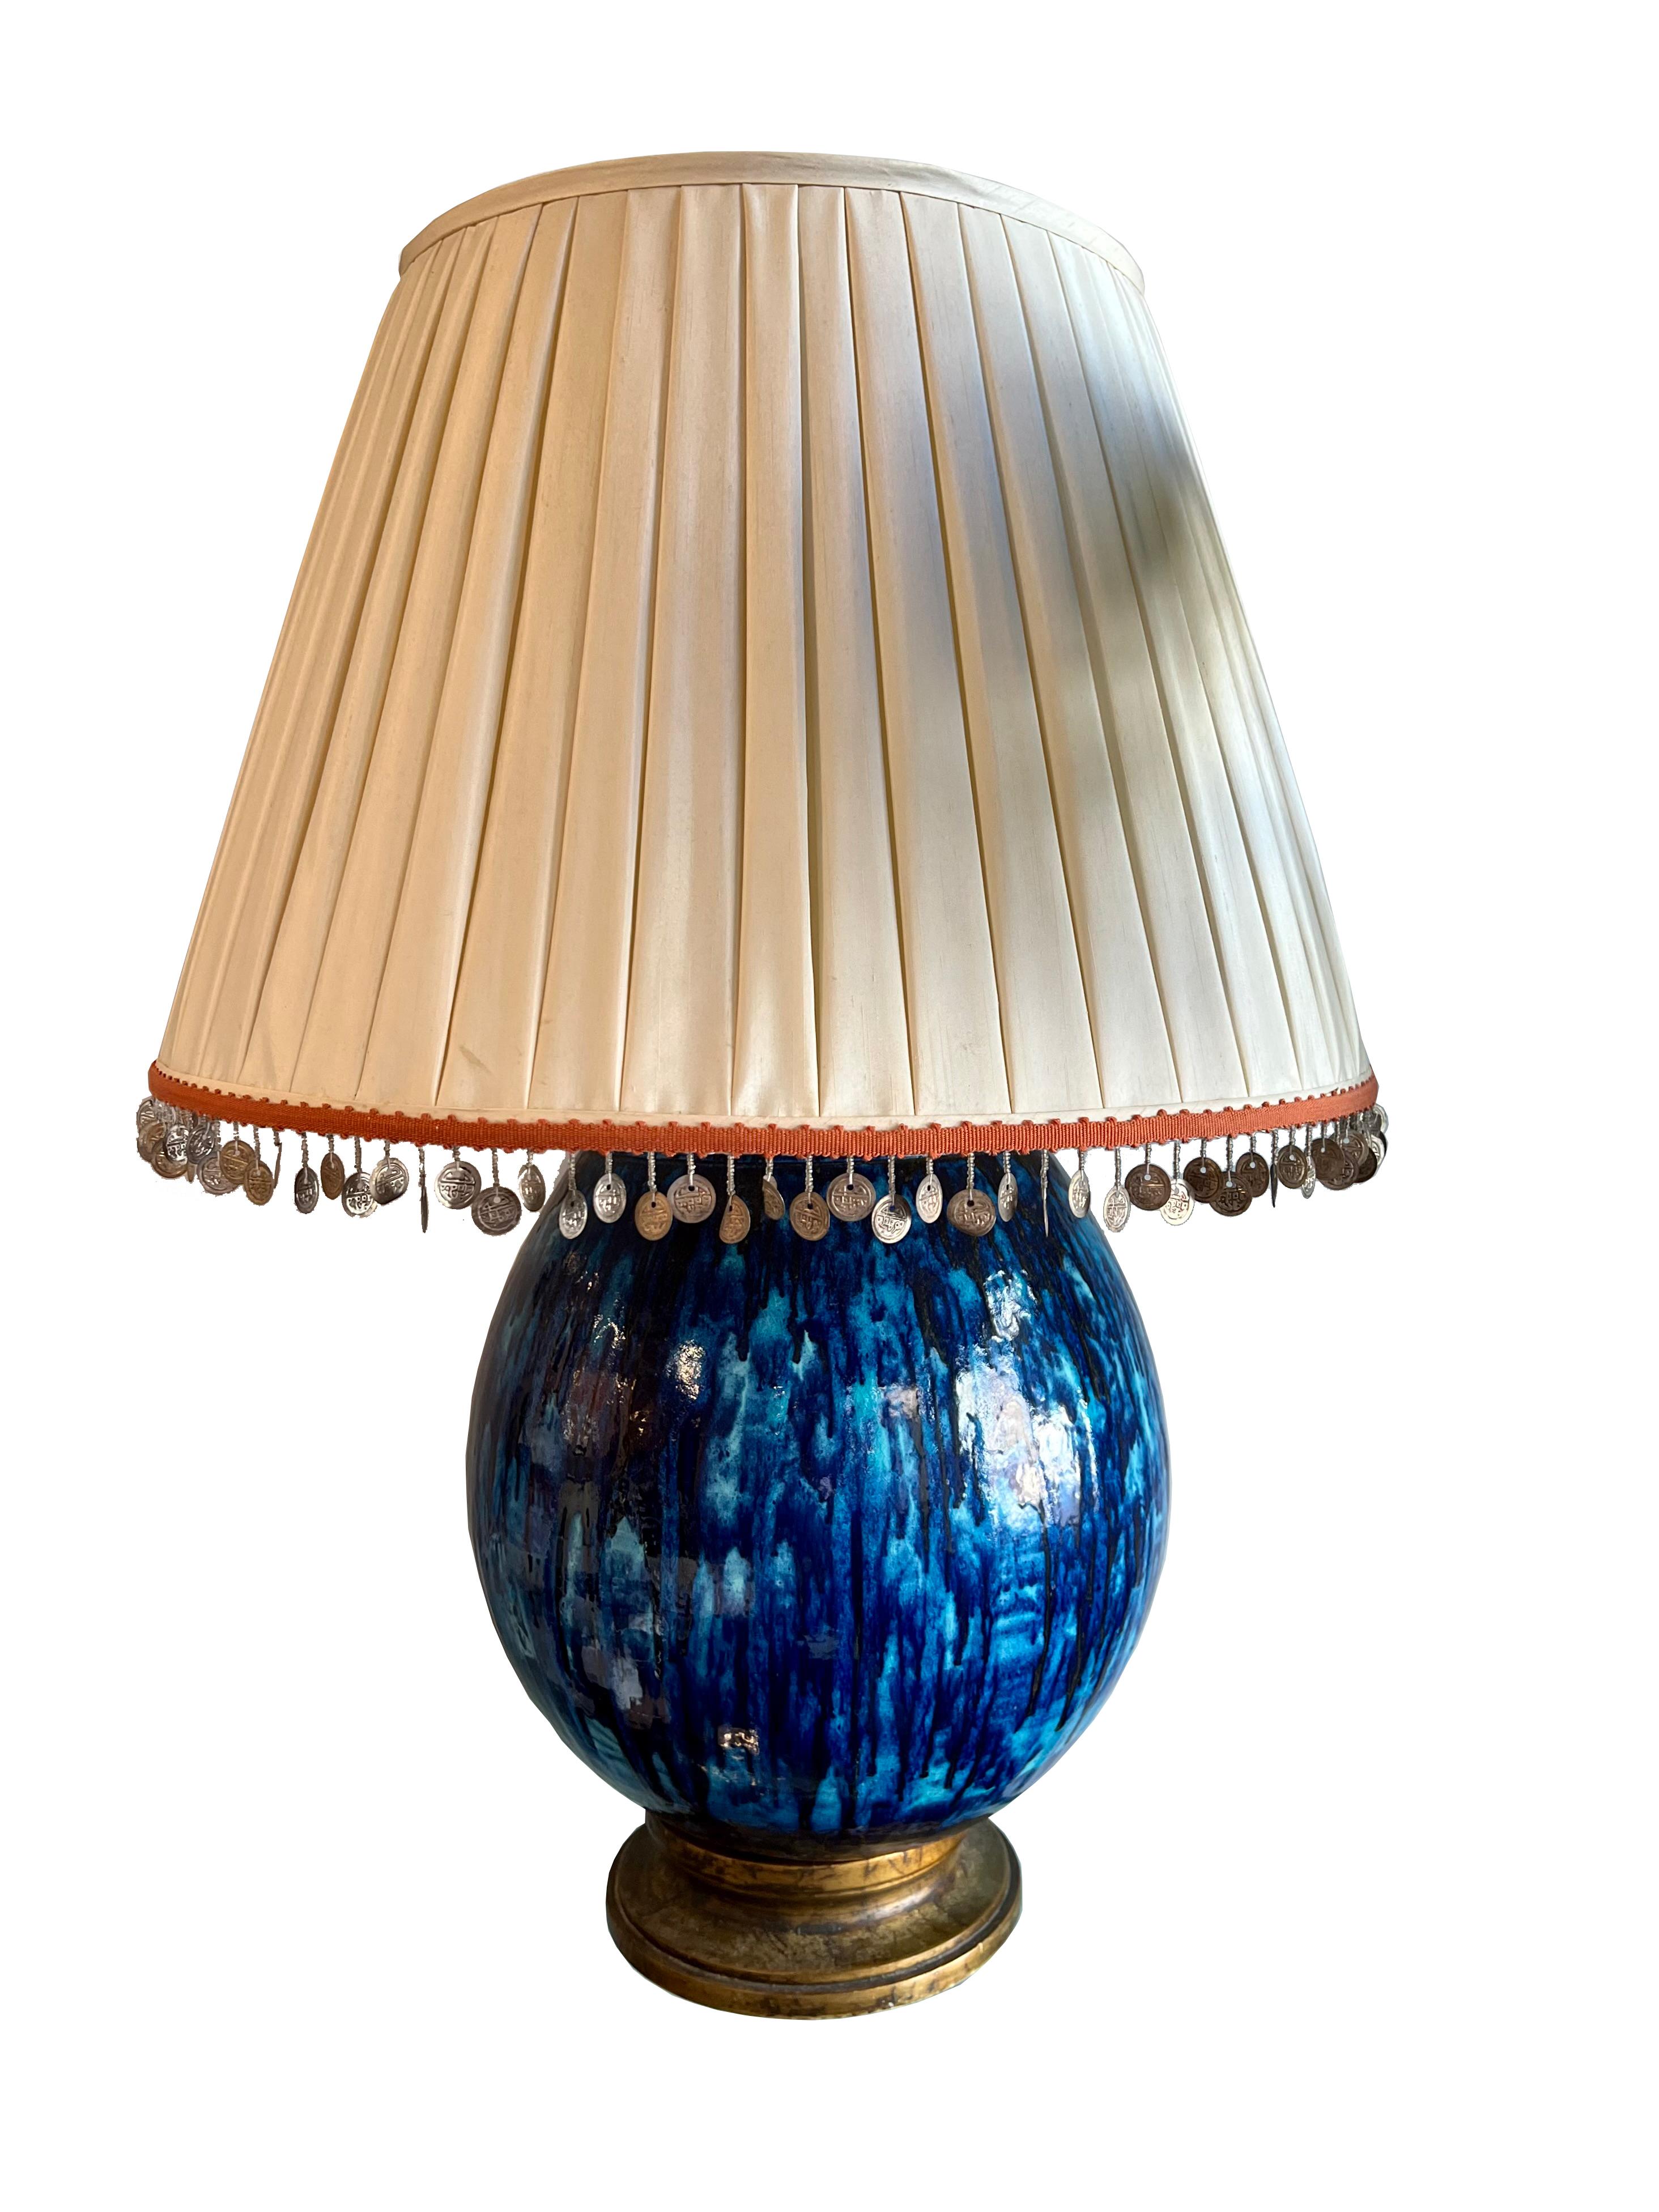 Extra-large vintage ceramic blue glazed lamp with custom silk lamp shade.
Lampshade has coin and orange tape trim along the bottom and lamp has a faux brass wood base.

Lamp Dimensions: 18